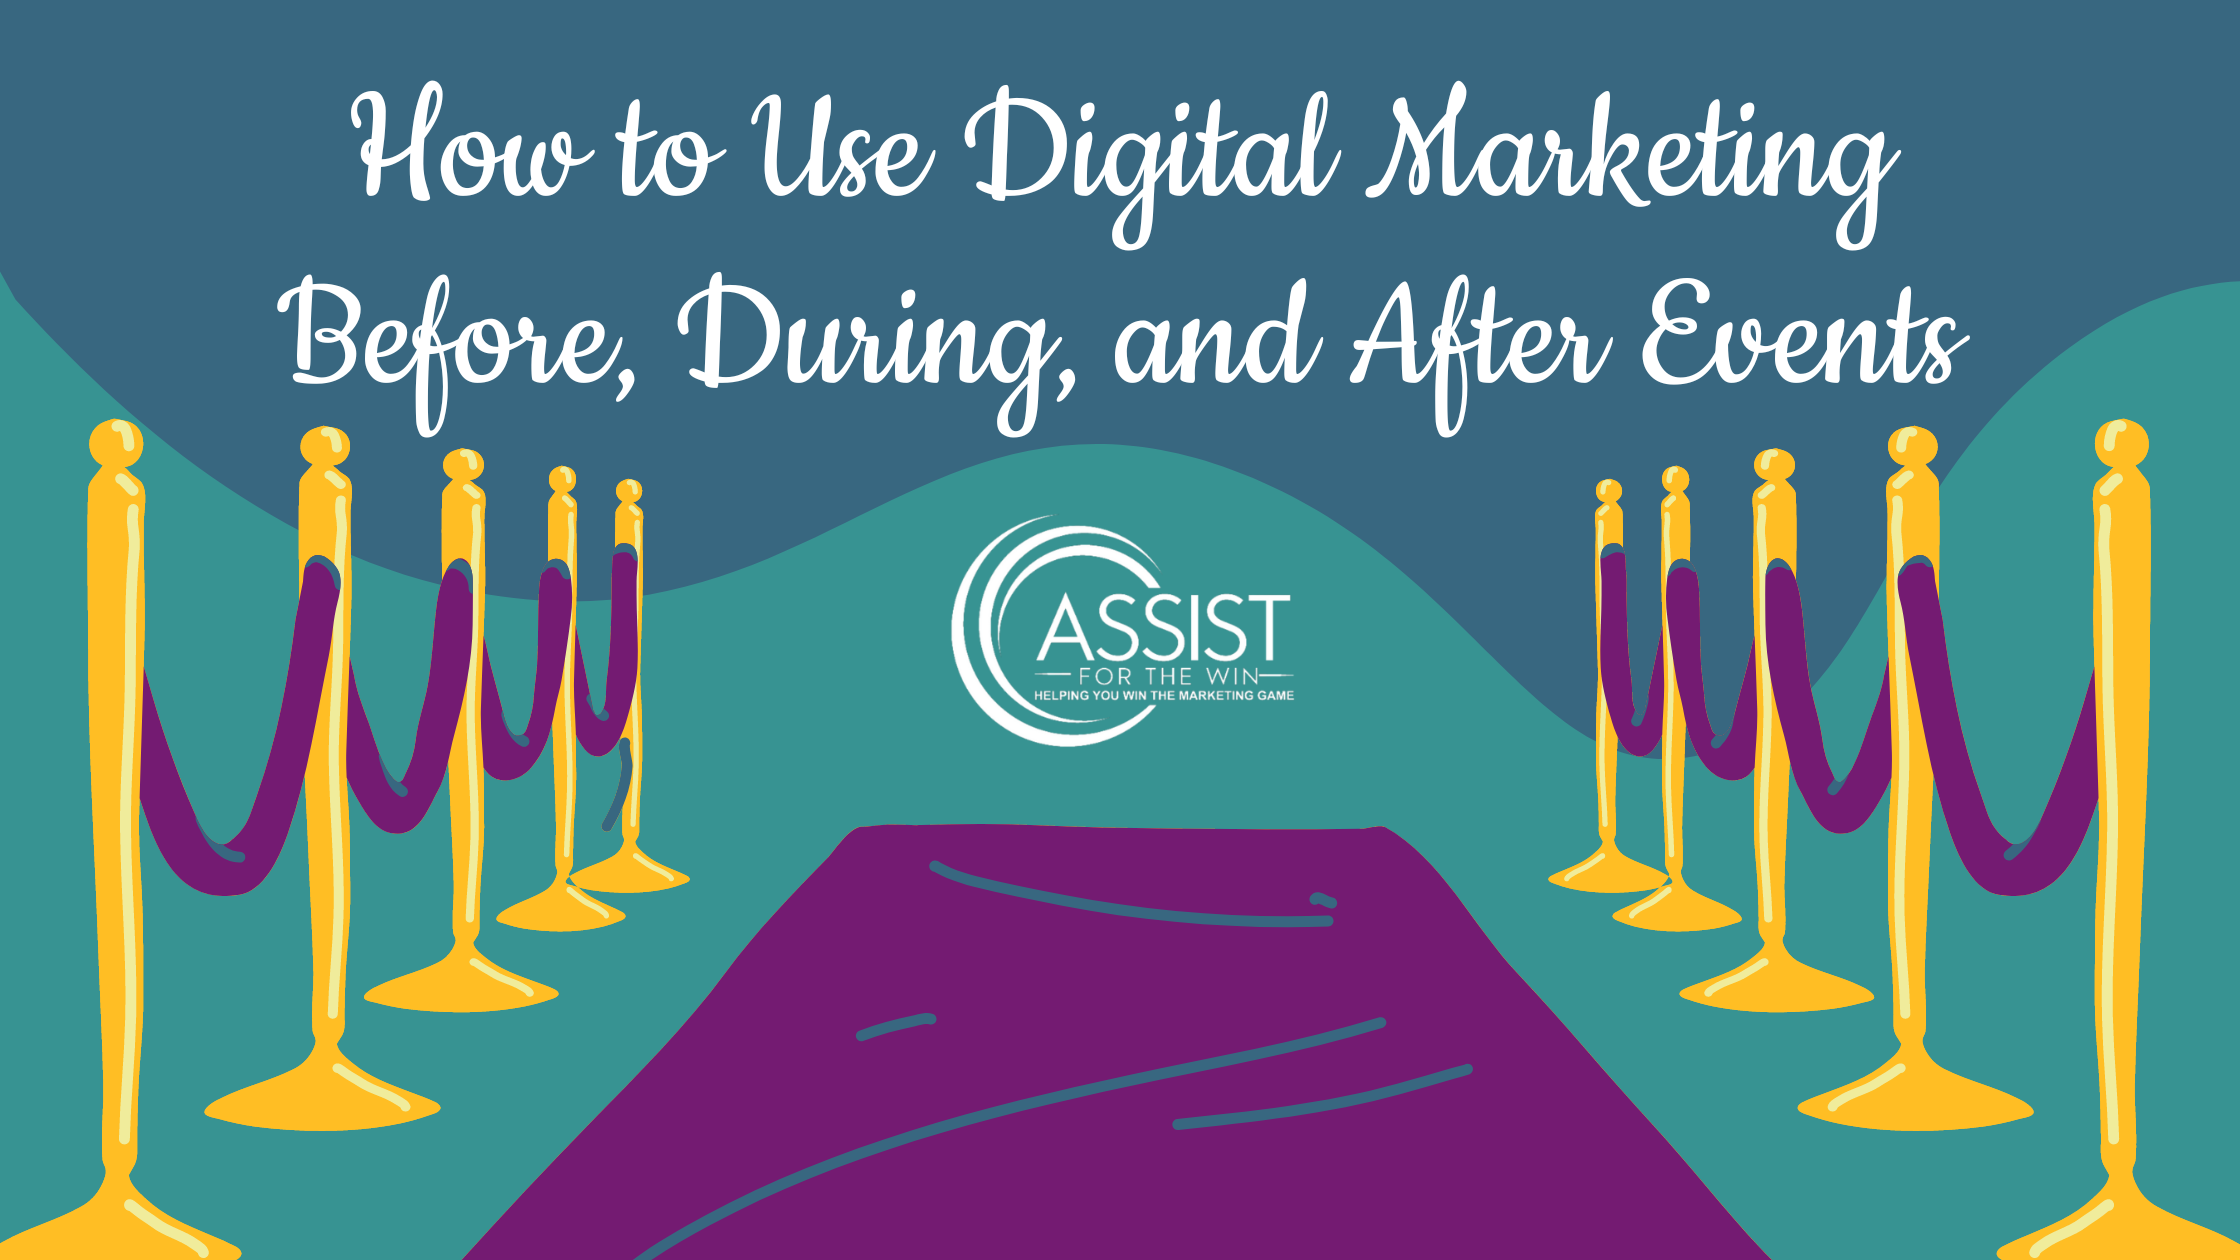 How to Use Digital Marketing Before, During, and After Events